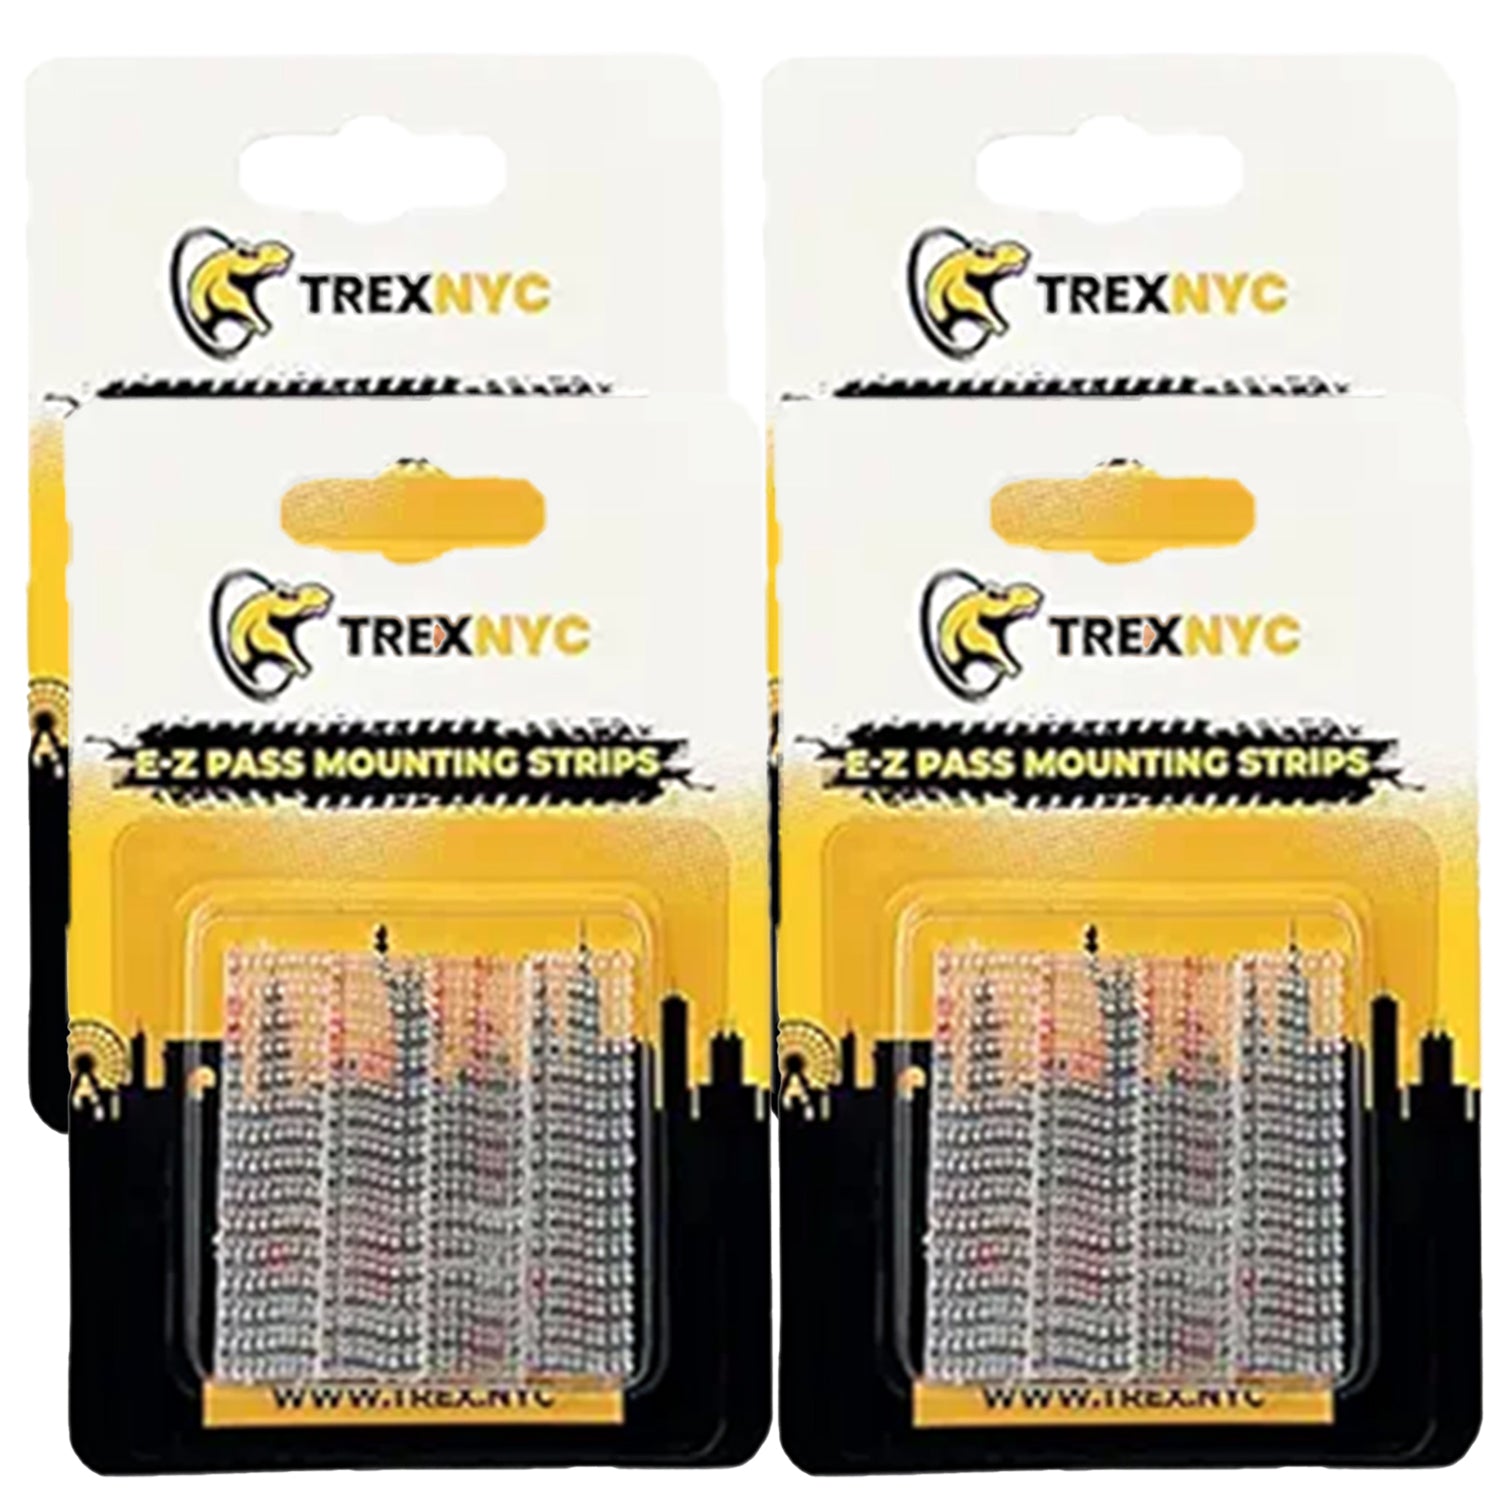 TrexNYC EZ Pass Mounting Strips, Heavy-Duty EZPass/IPass/Toll Pass Mounting  Strips, Peel and Stick Adhesive Strips Dual Lock Tape, 4 Packs by GOSO  Direct